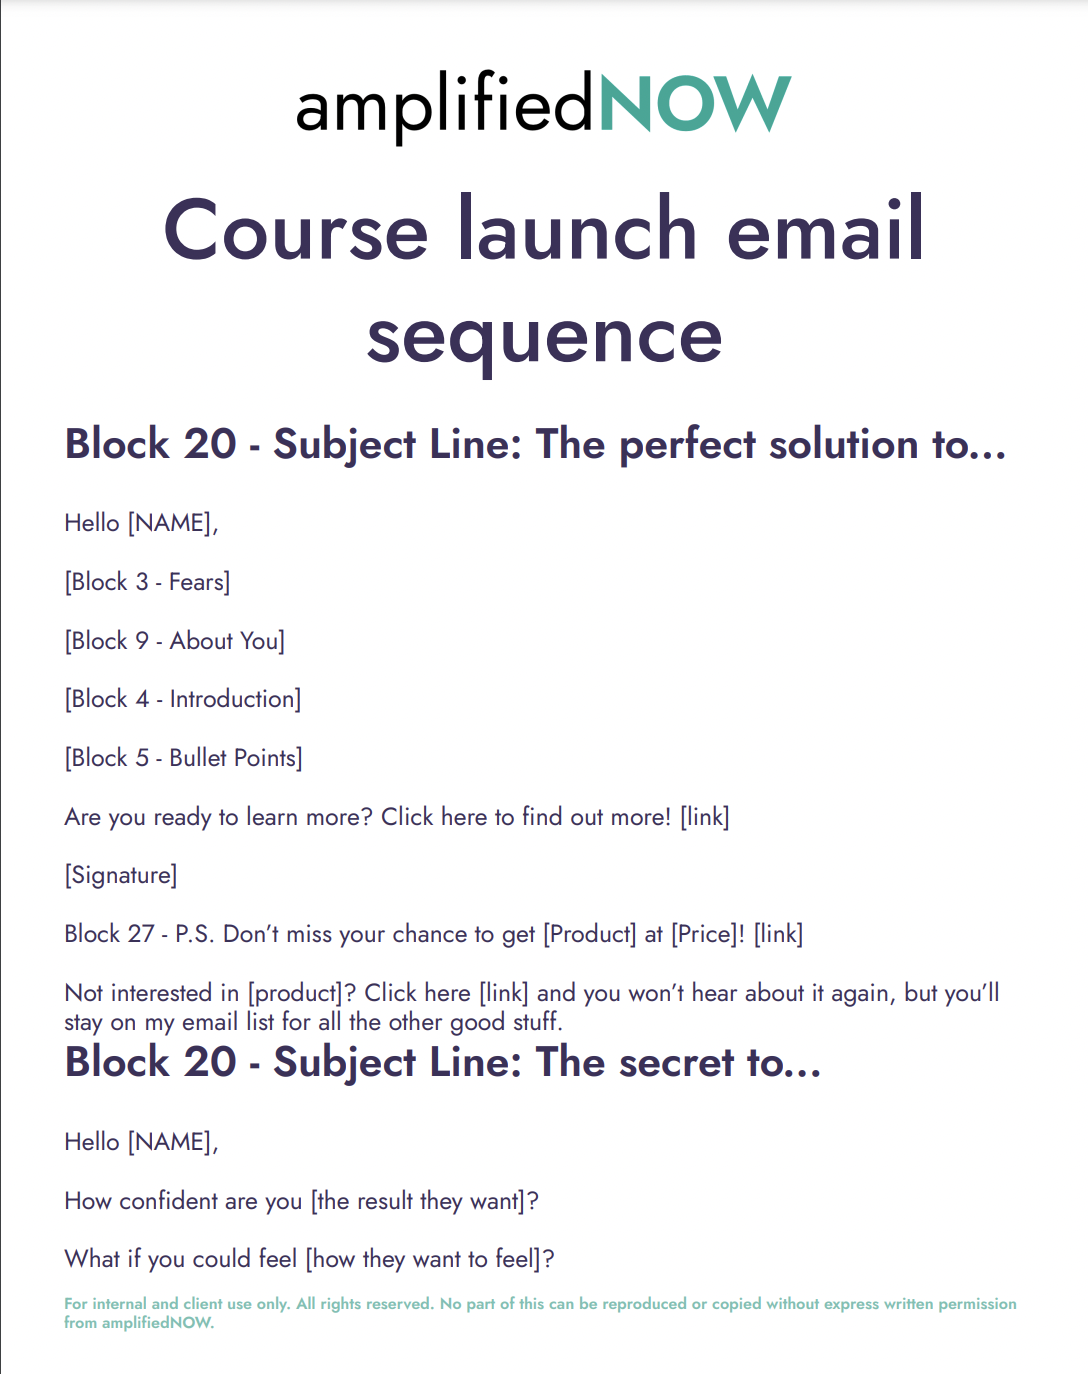 Course Launch Email Sequence